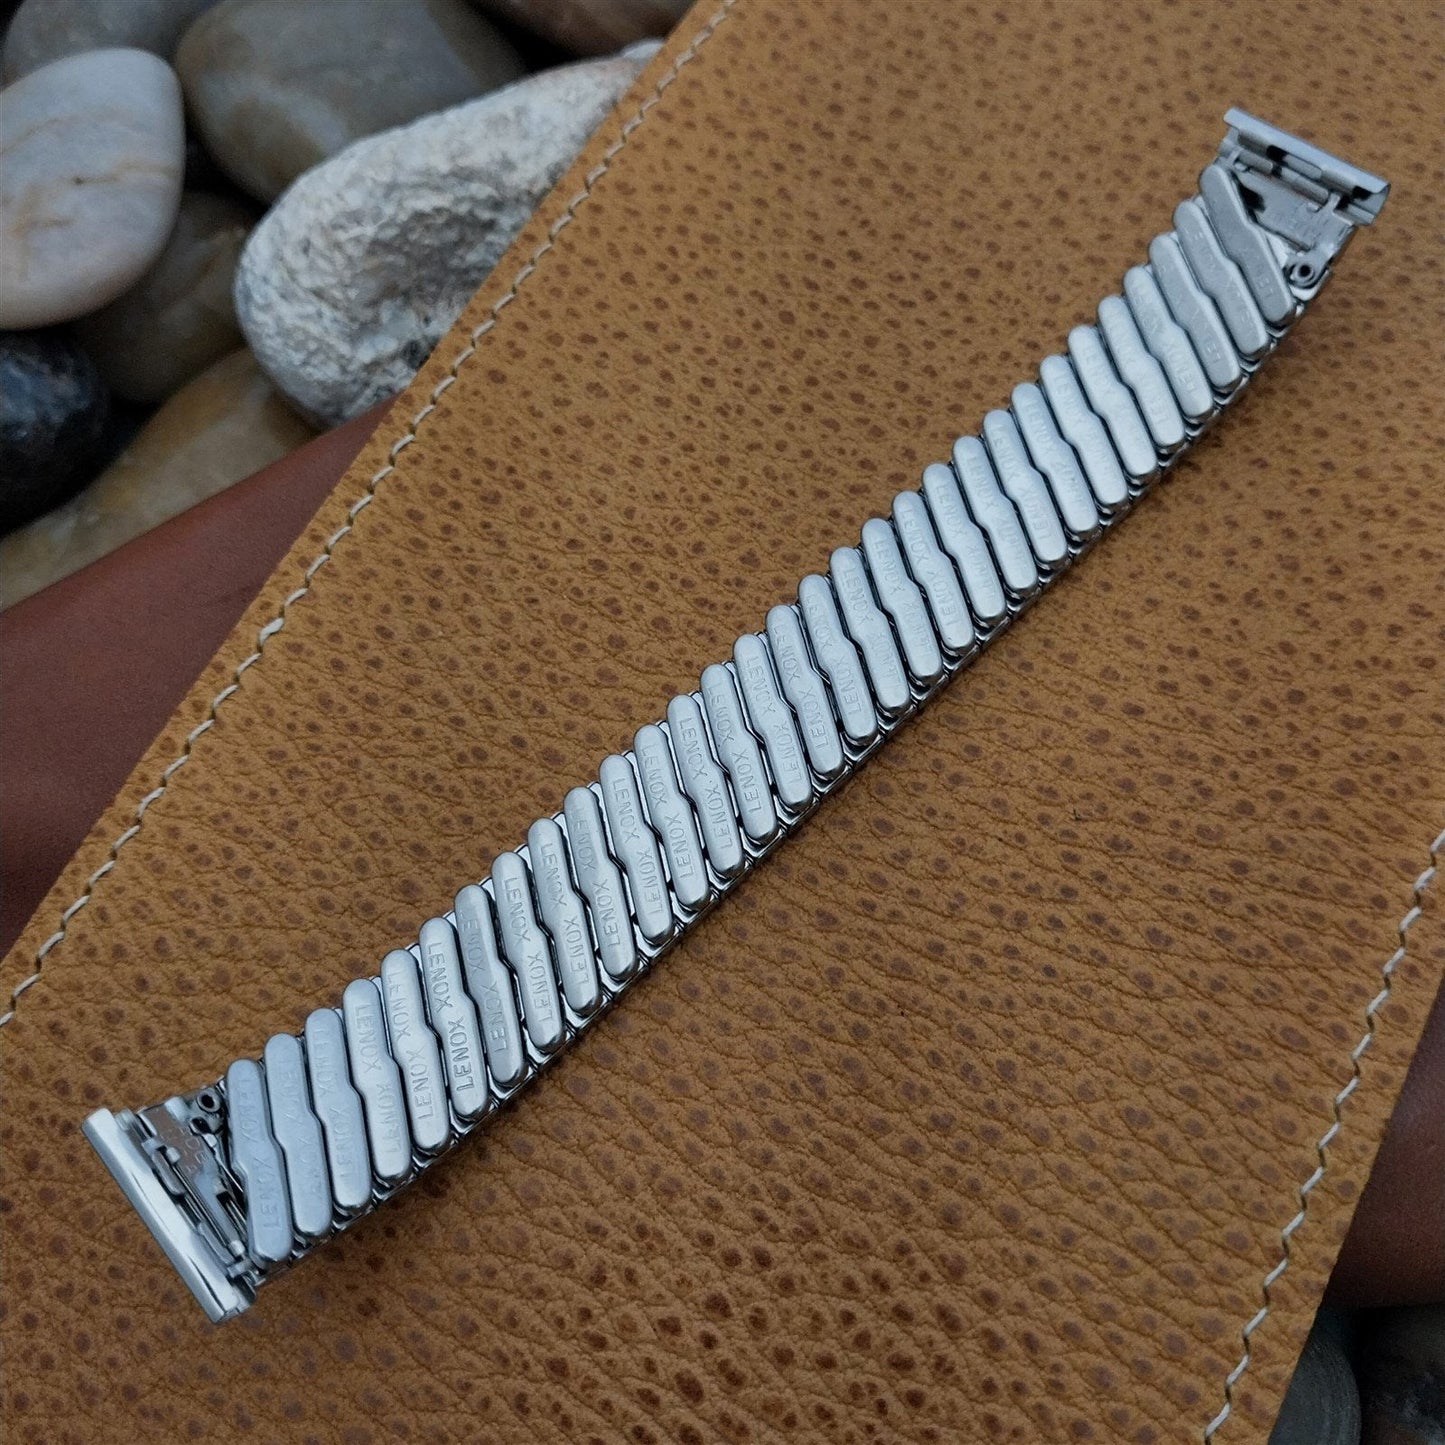 17.2mm Lenox USA Stainless Steel nos 1960s Vintage Watch Band